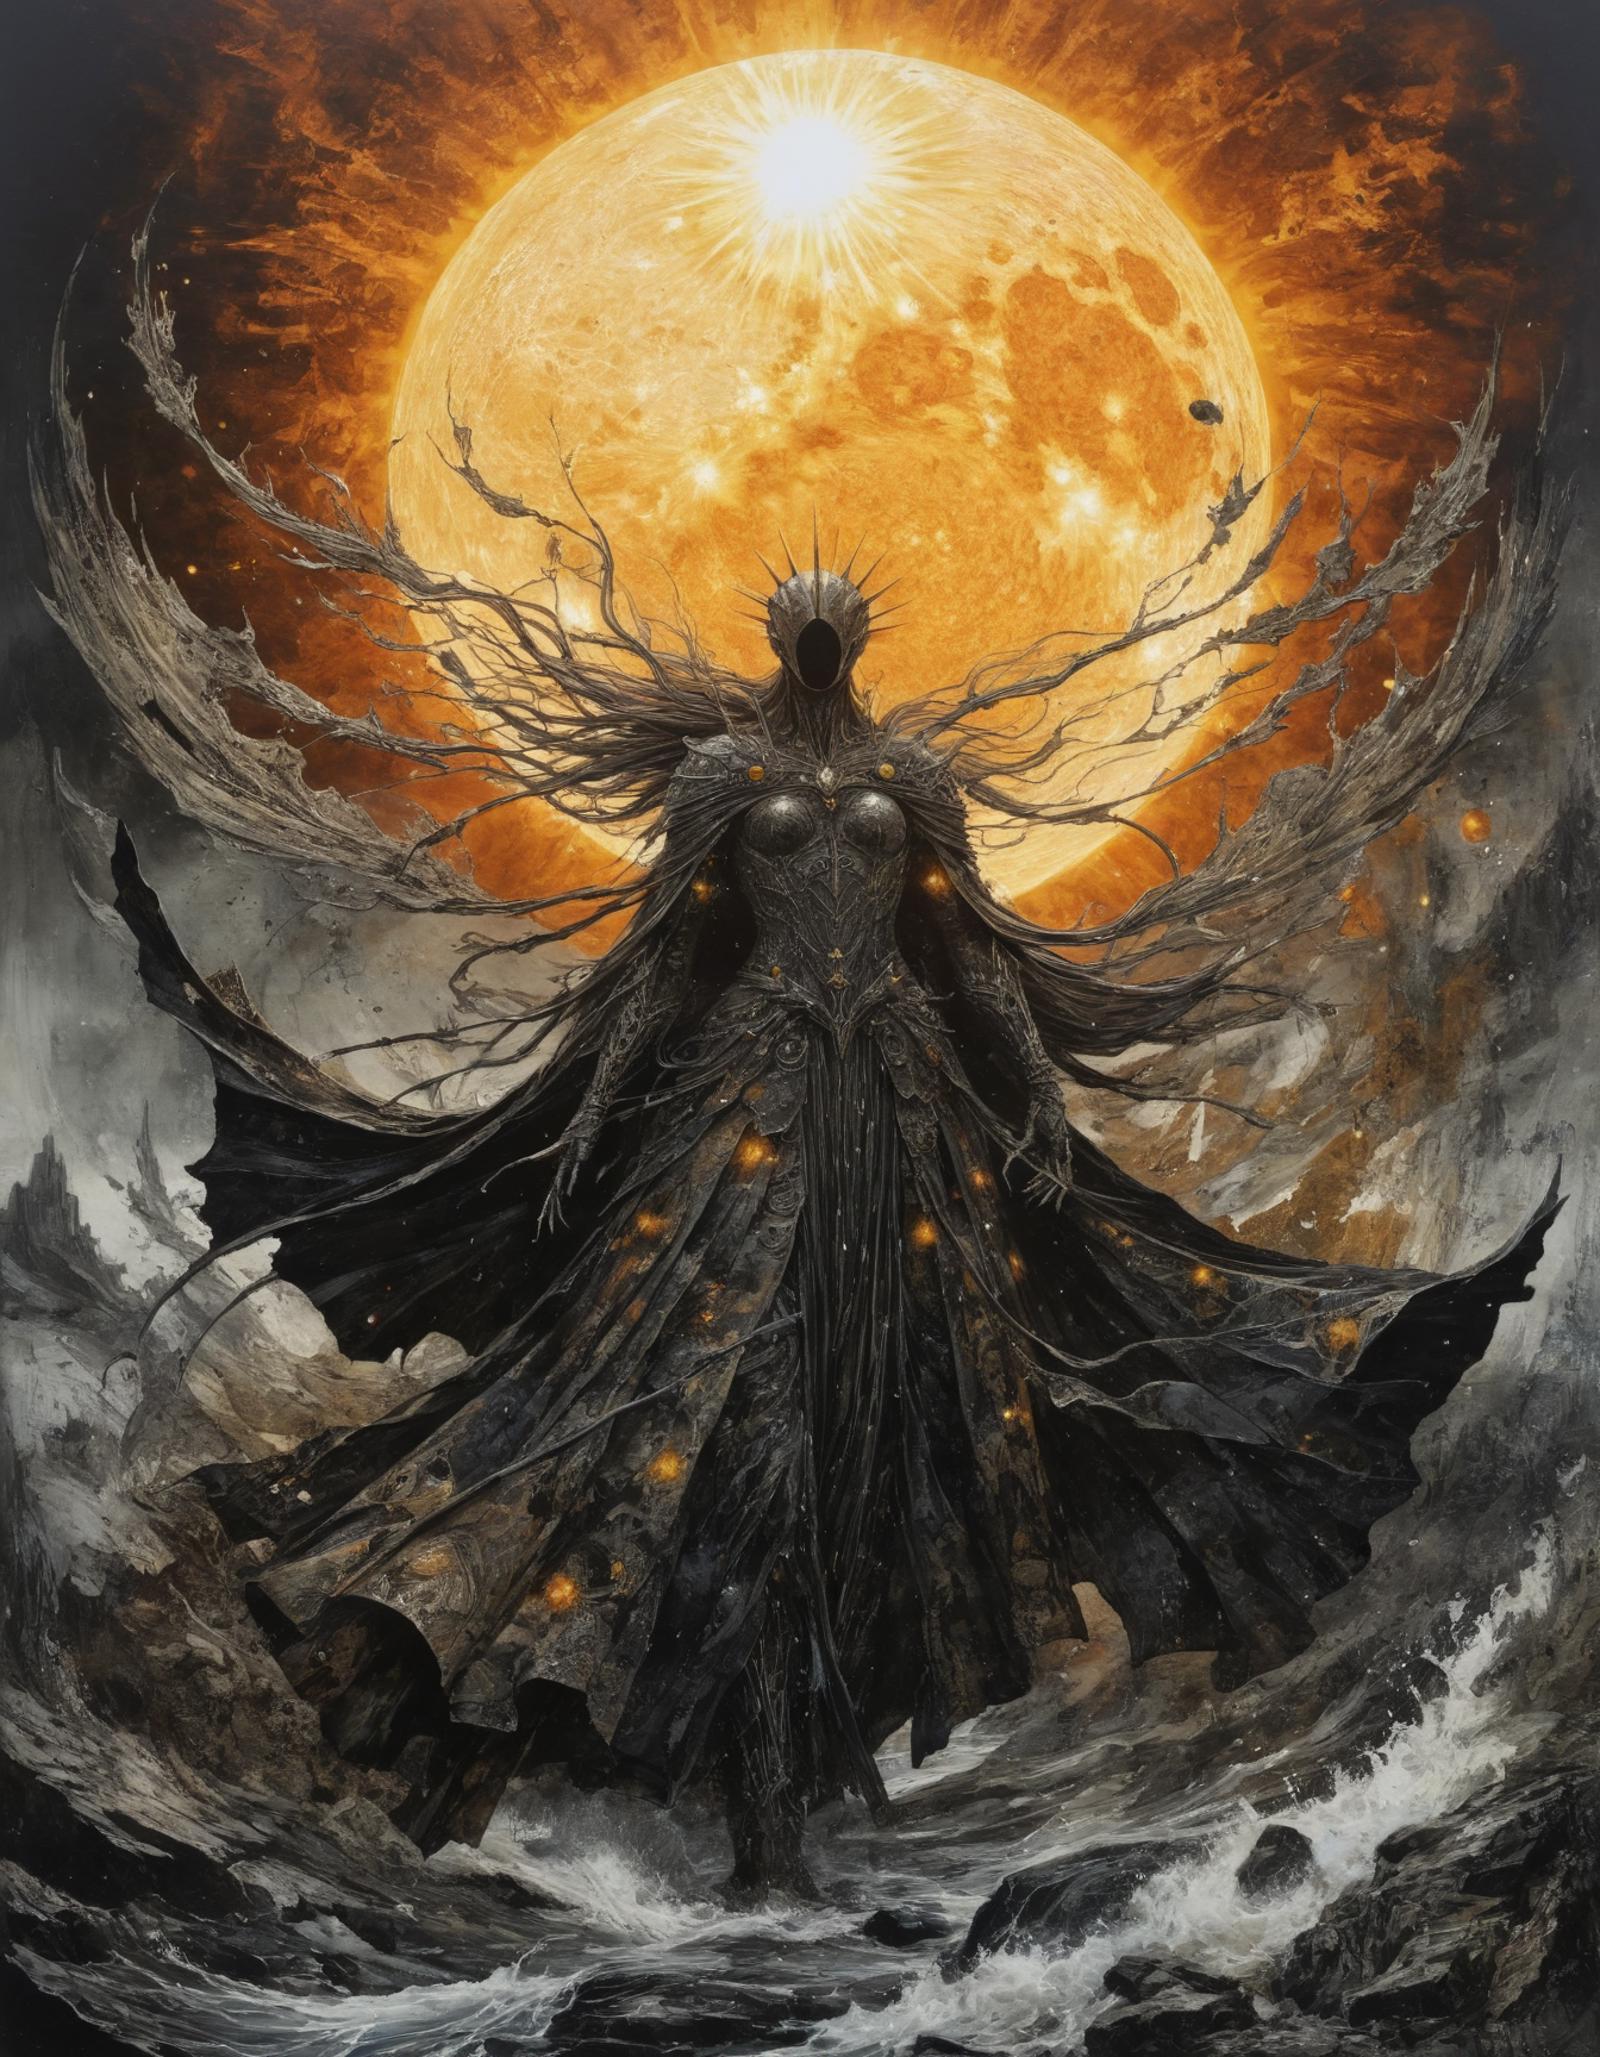 The artwork features a woman with long black hair, dressed in black, and standing in front of a large sun. She appears to be a demon or a female warrior, with her wings spread wide, possibly indicating a powerful or supernatural presence. The sun in the background adds a dramatic and intense atmosphere to the scene. The overall impression is one of strength and mystery, as the woman's dark appearance contrasts with the bright, fiery sun.